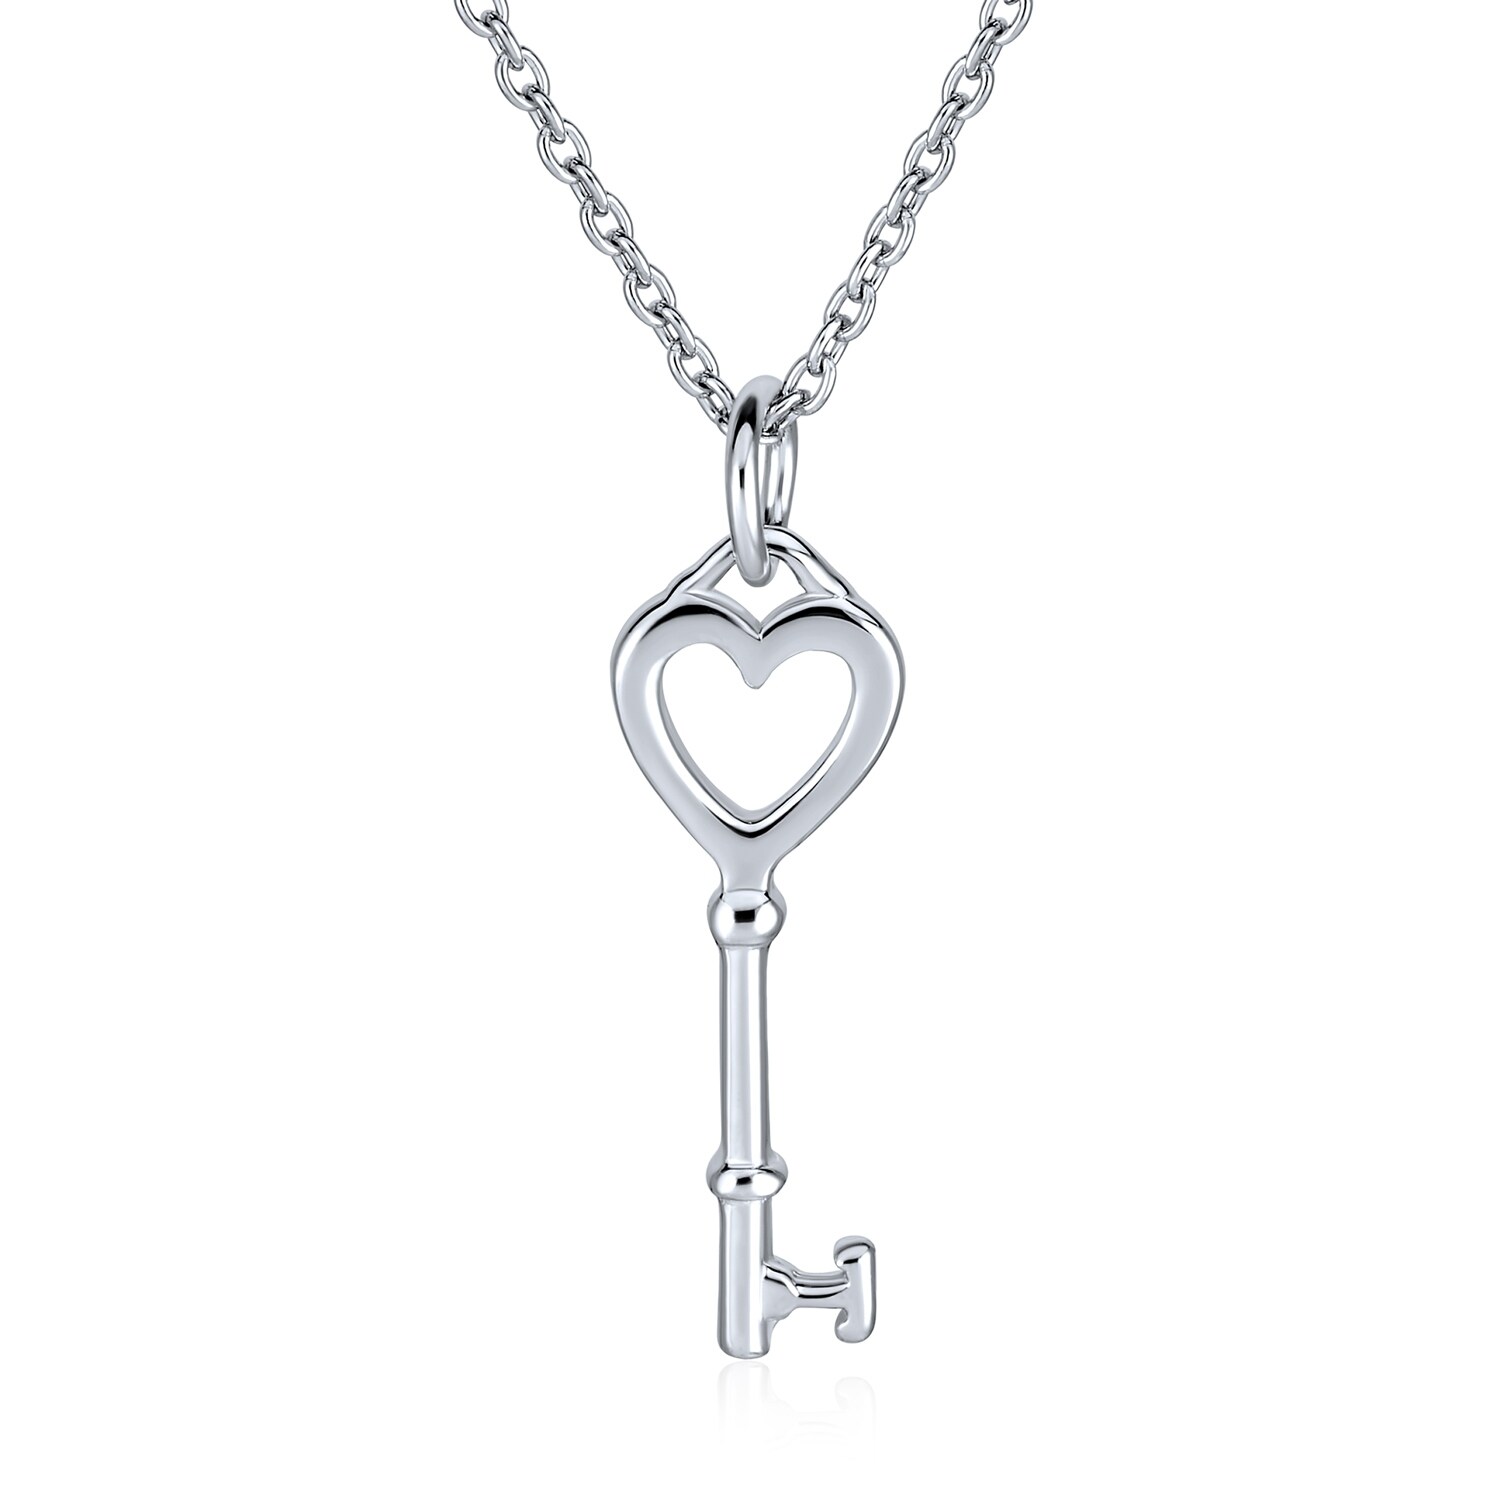 Love Heart Key 925 Sterling Silver Dangle Pendant Necklace for Wedding Cocktail Party Vintage Style 1.5 Carat Created Diamond 8086